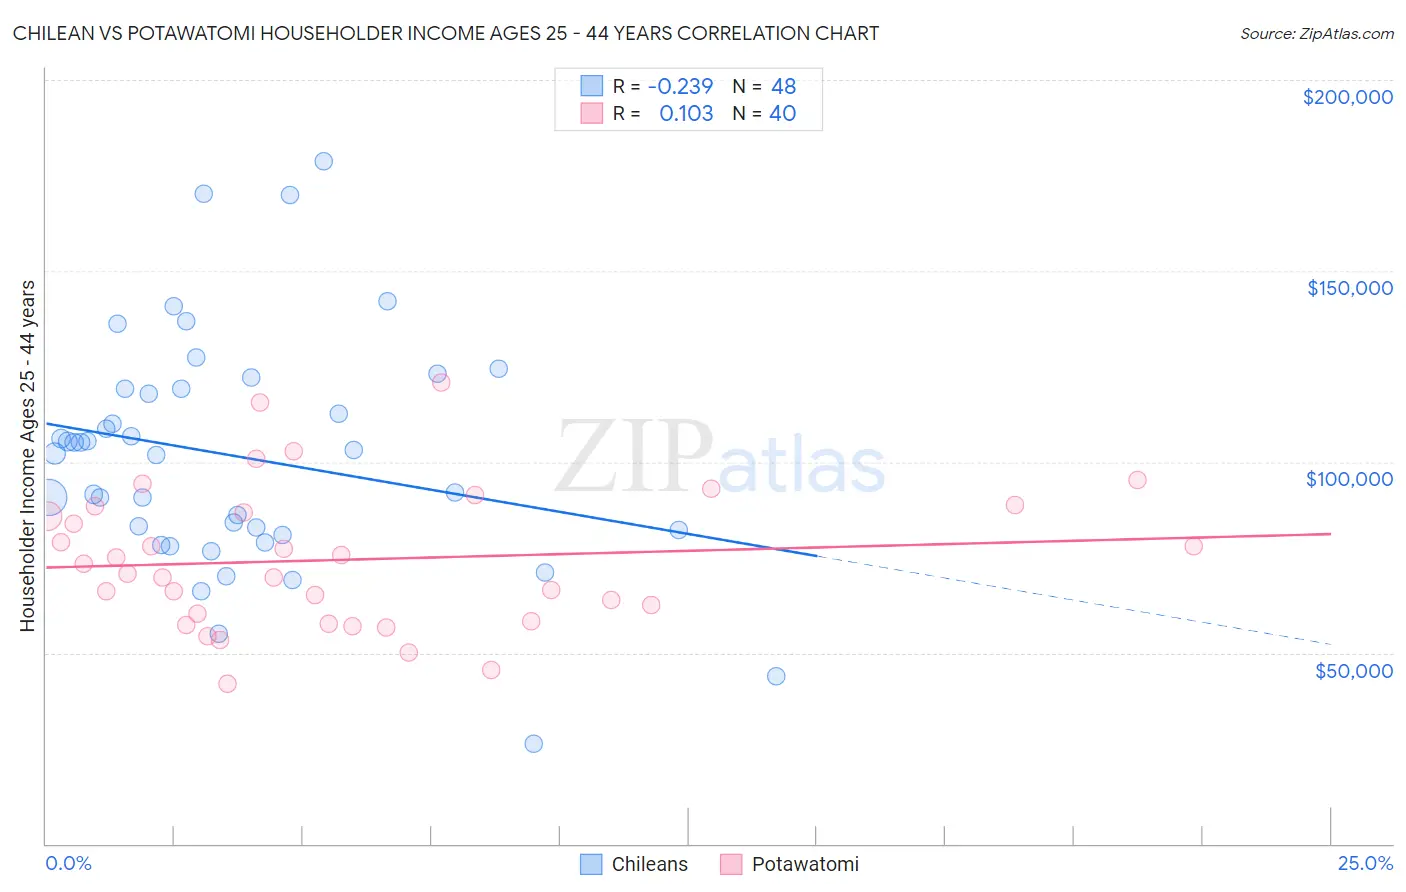 Chilean vs Potawatomi Householder Income Ages 25 - 44 years